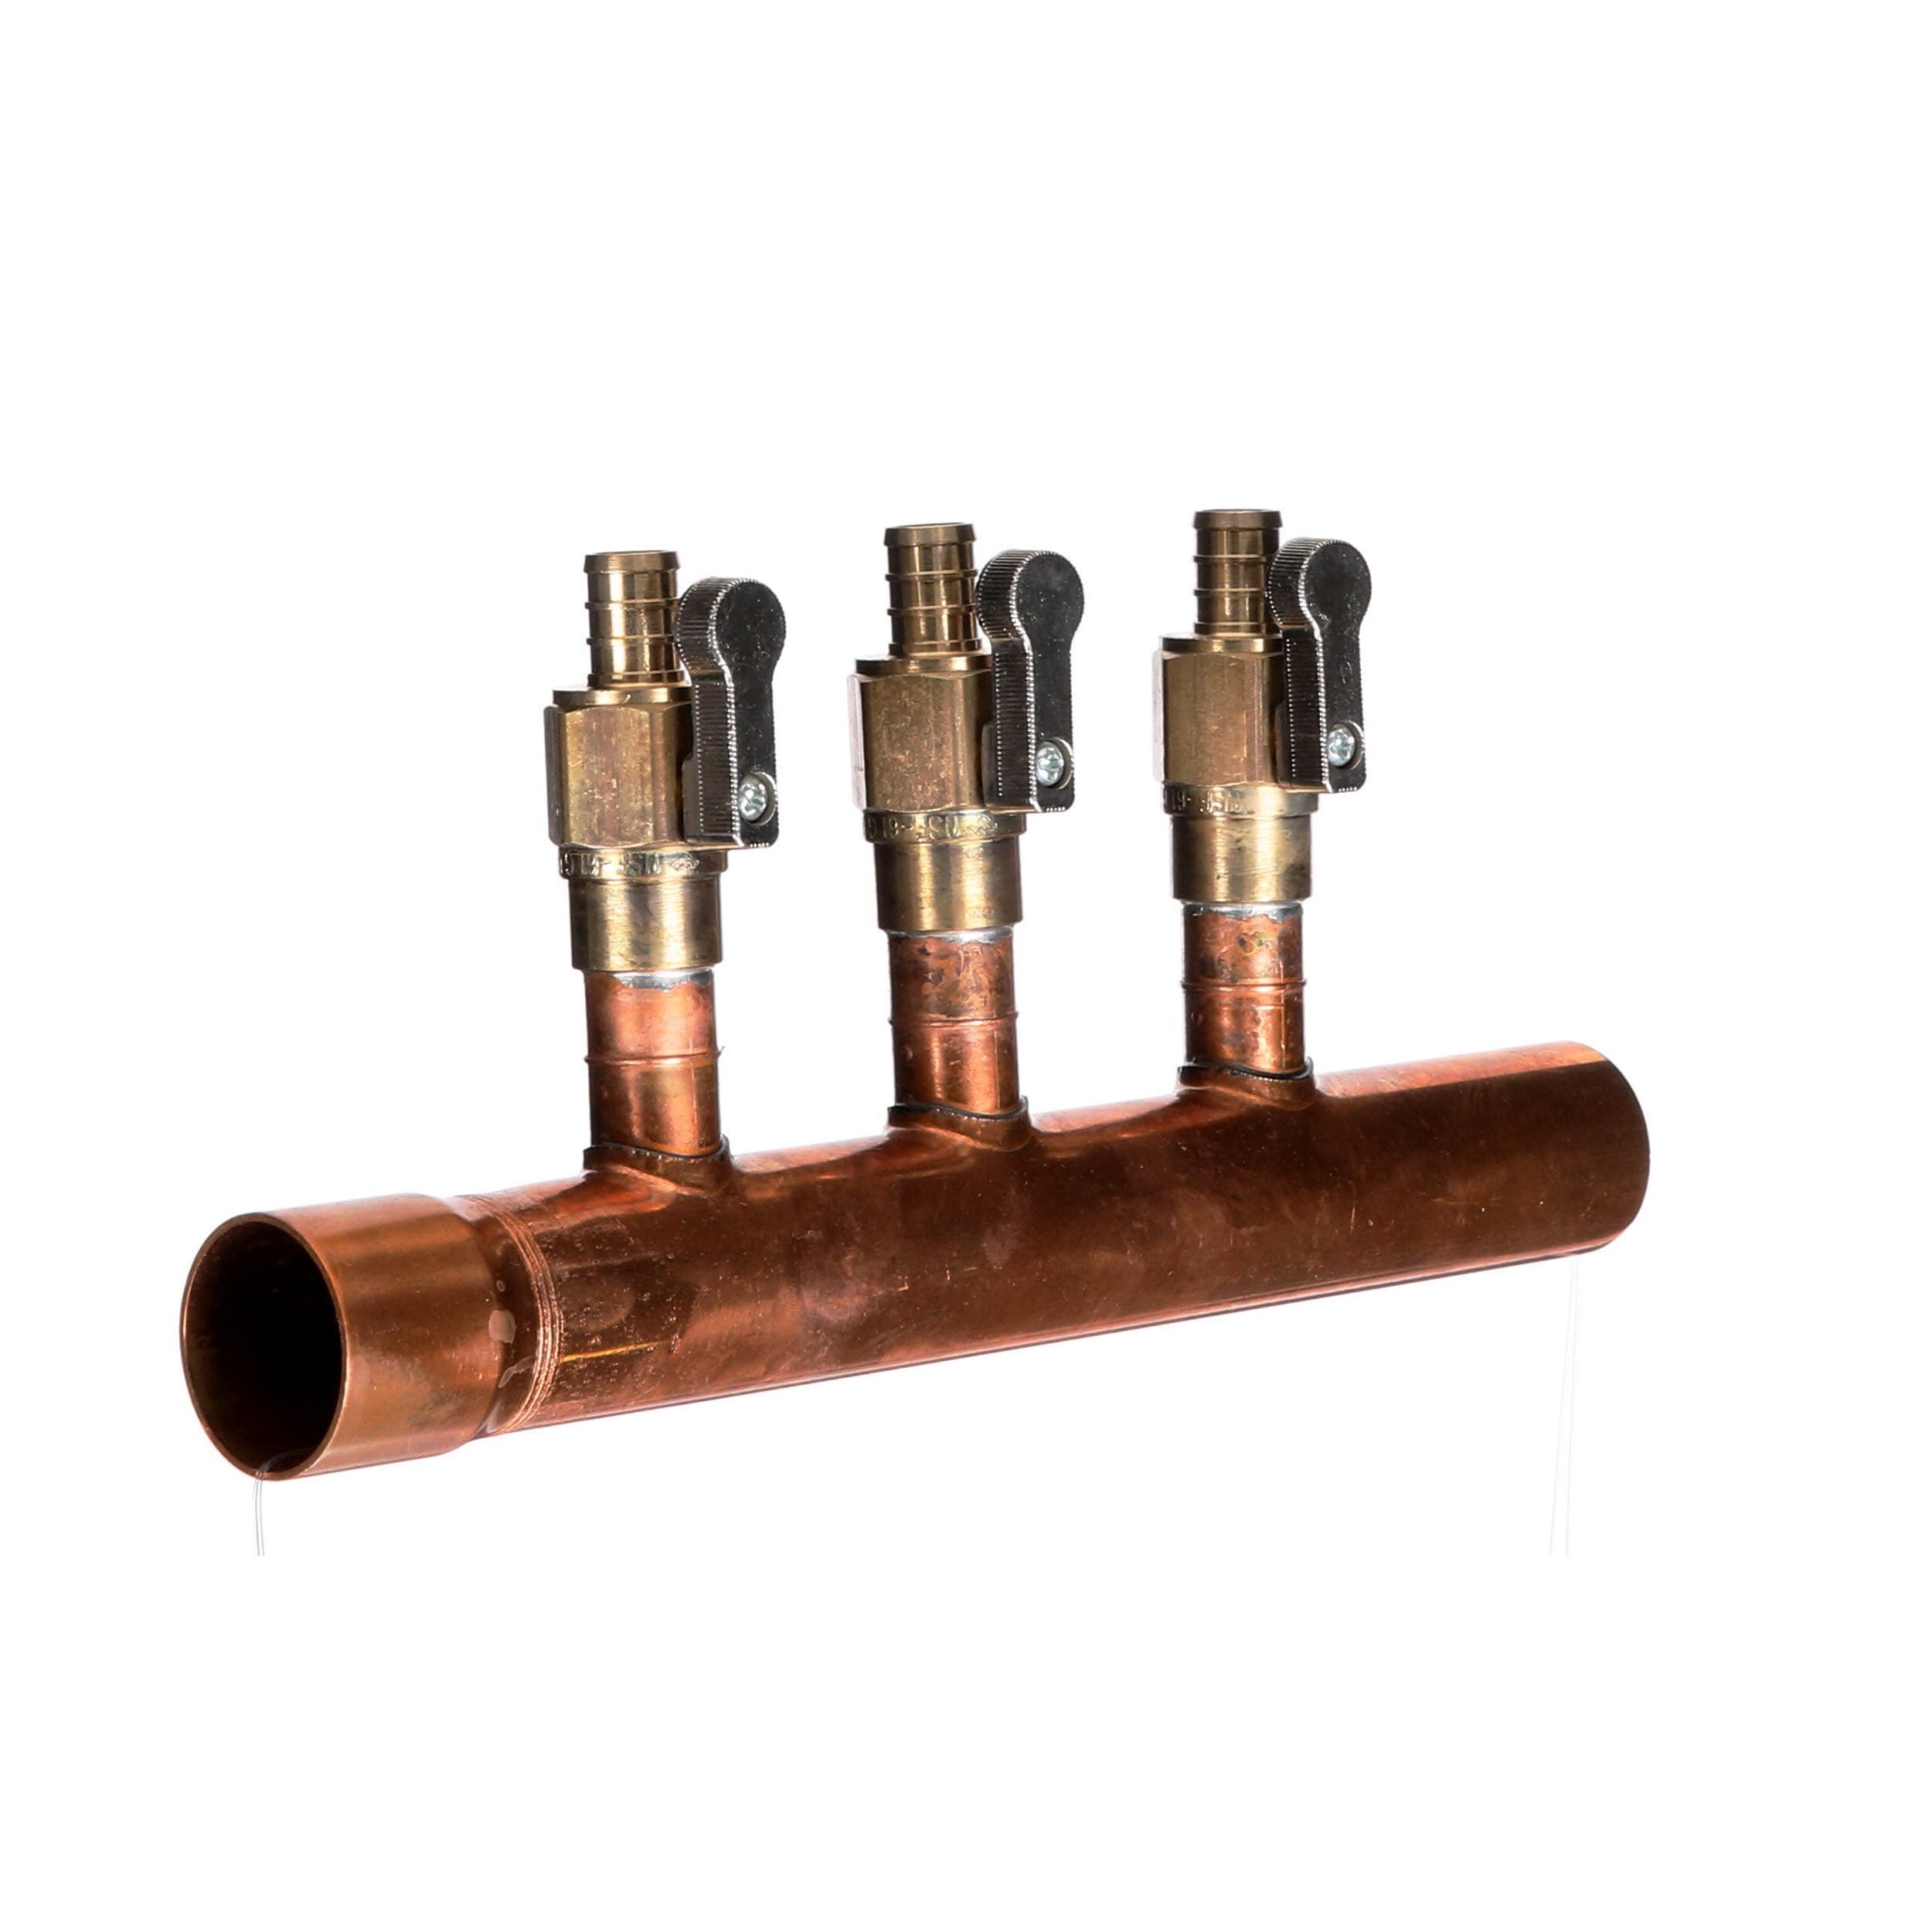 With & Without Ball Valve 2-12 Loop 1" Complete Copper Manifold 1/2" Crimp Fit